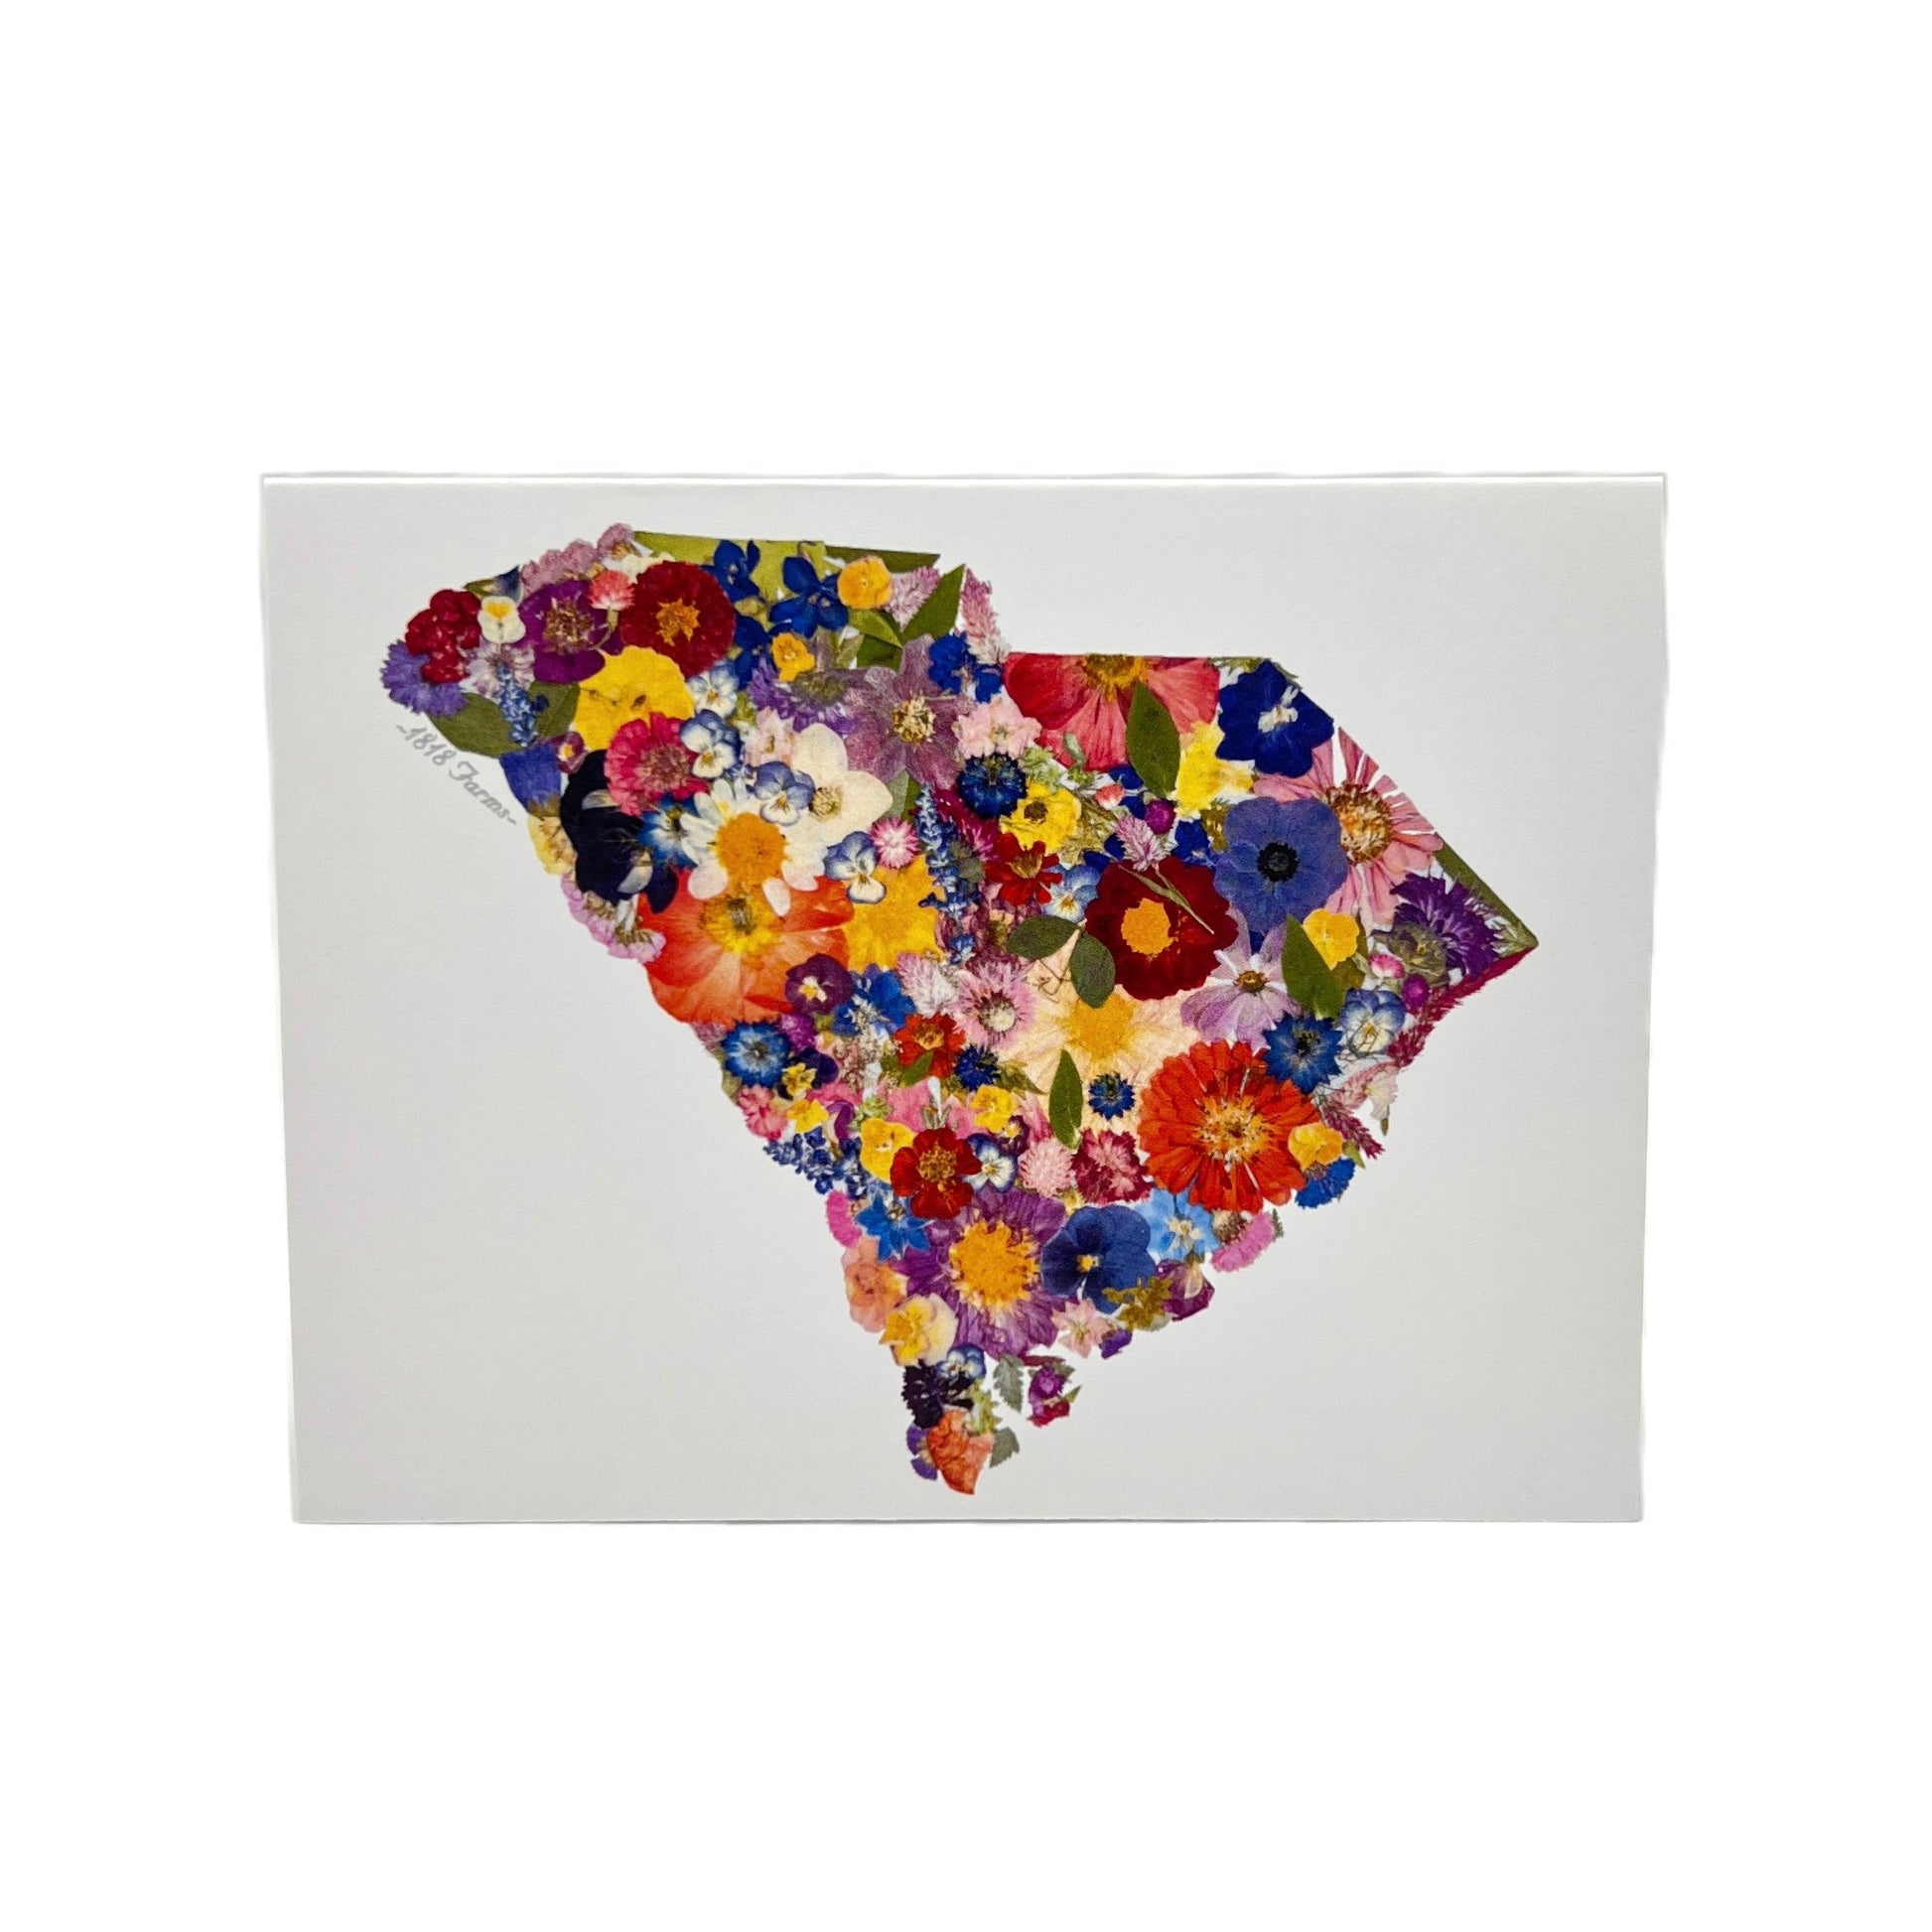 State Themed Notecards (Set of 6)  - "Where I Bloom" Collection Notecard 1818 Farms South Carolina  